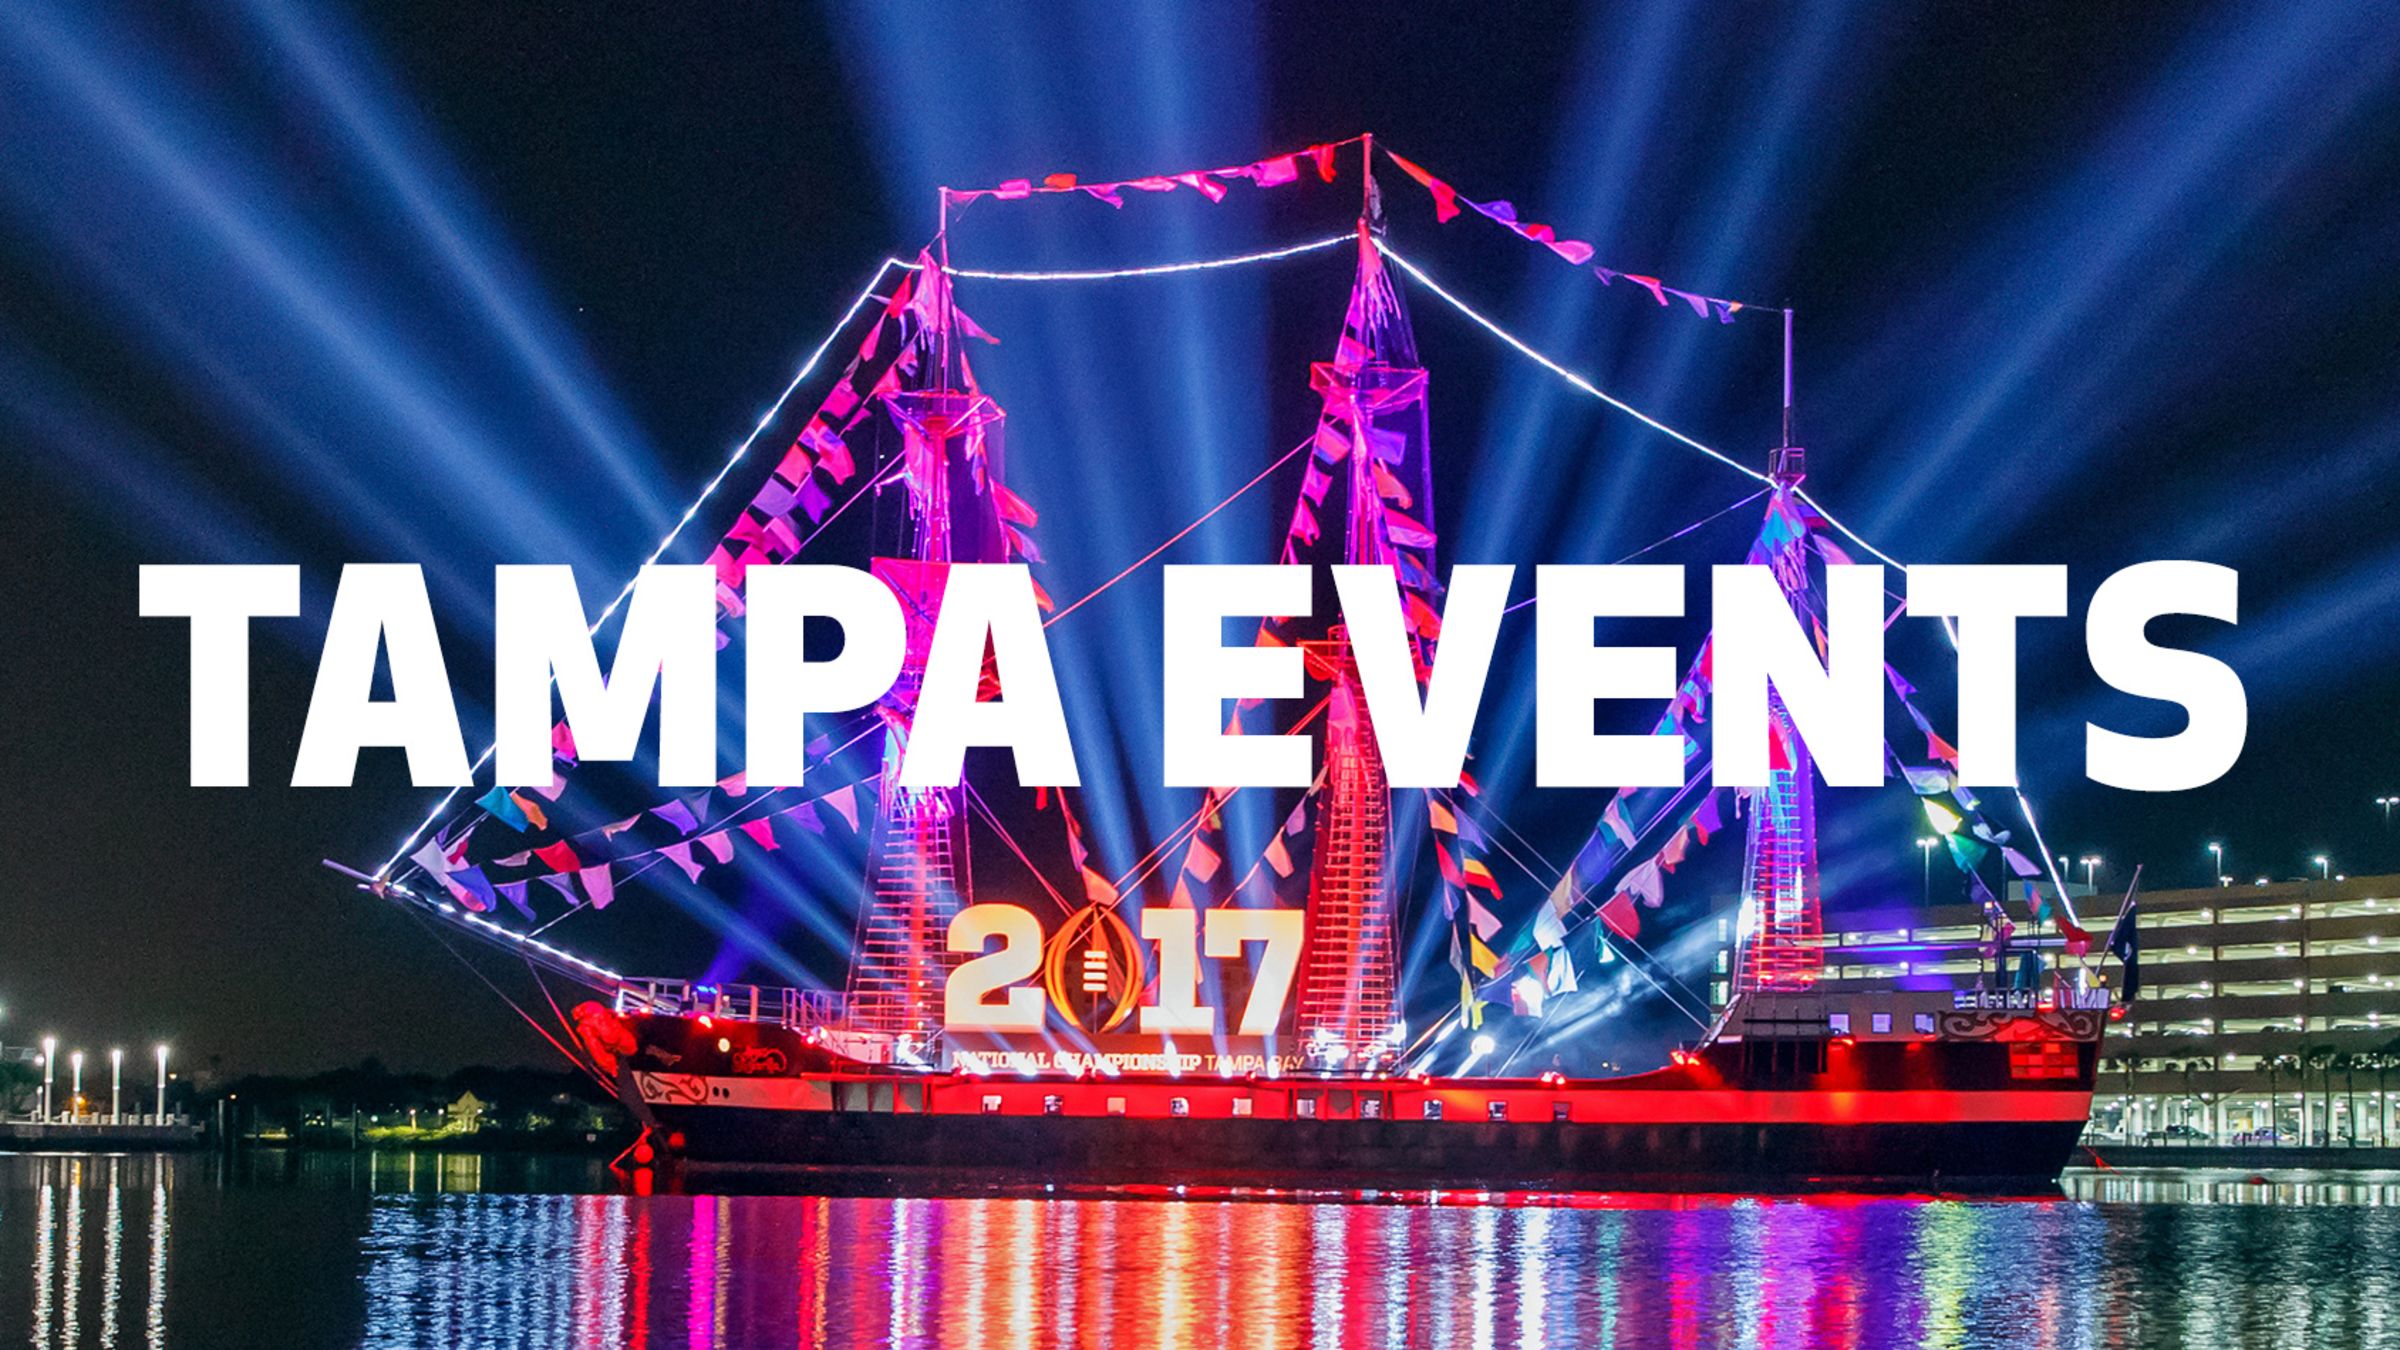 Tampa Events - Calendar of Events | Visit Tampa Bay